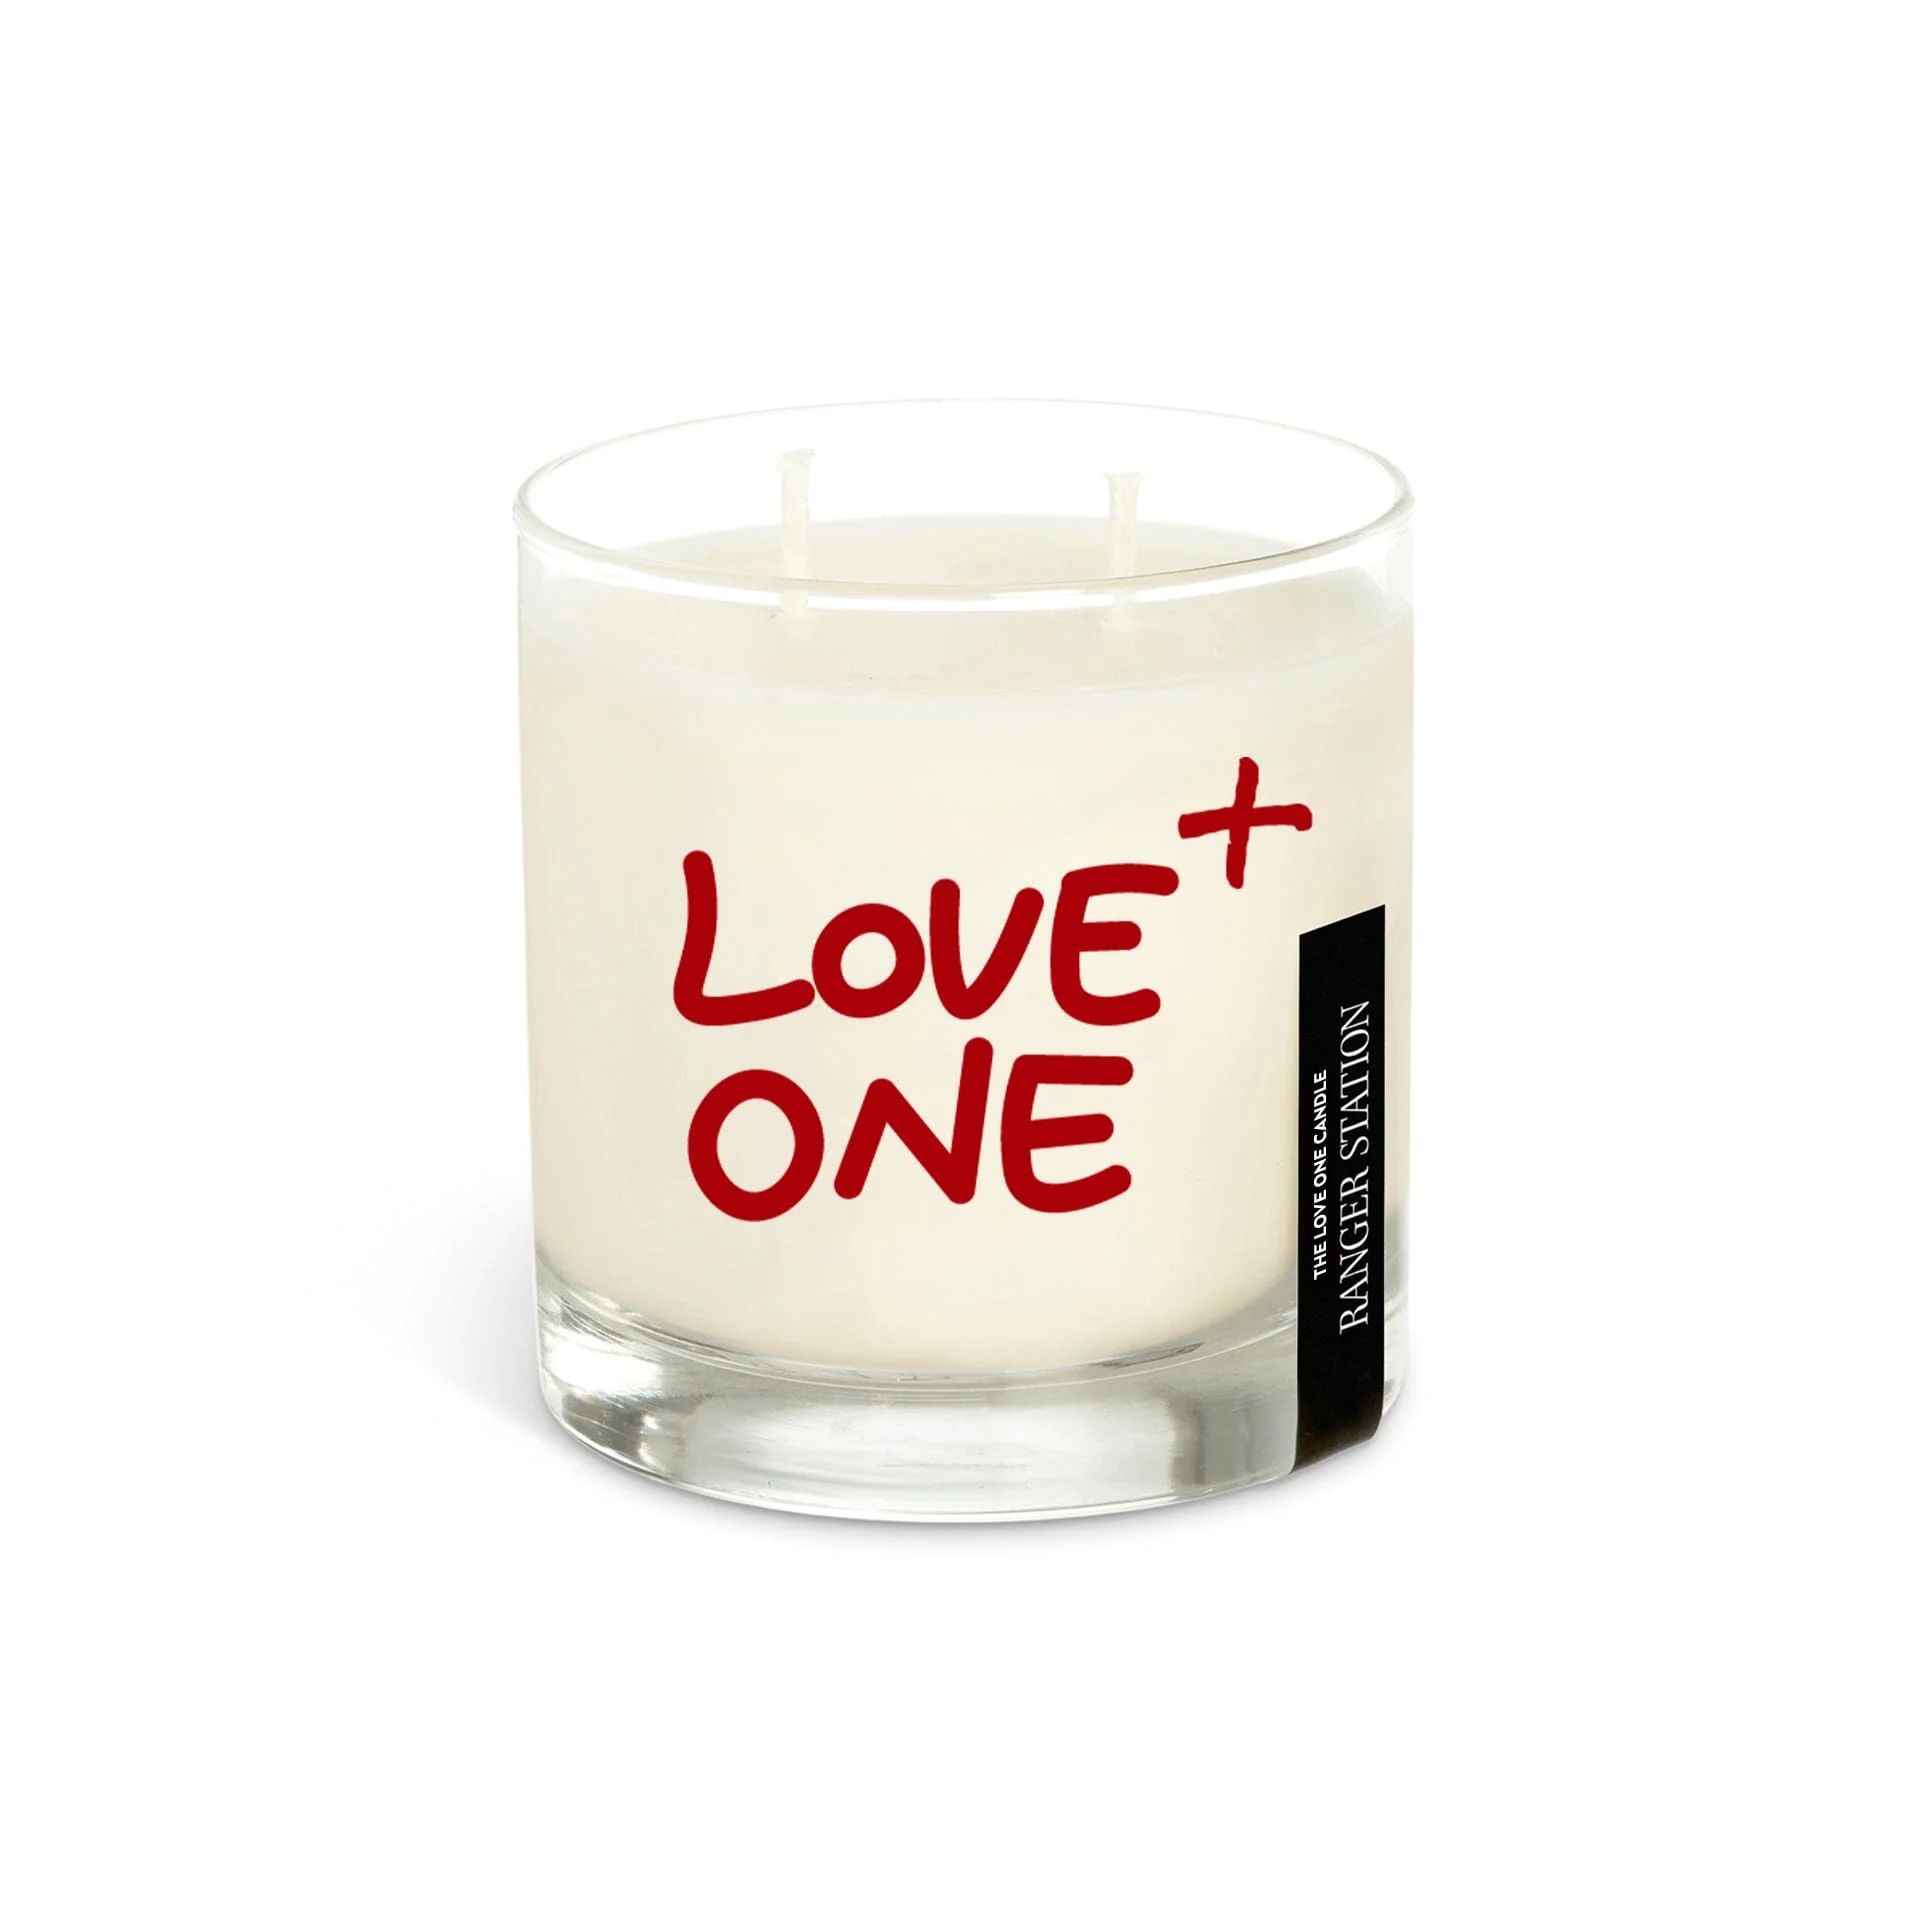 THE LOVE ONE CANDLE | Ranger Station 